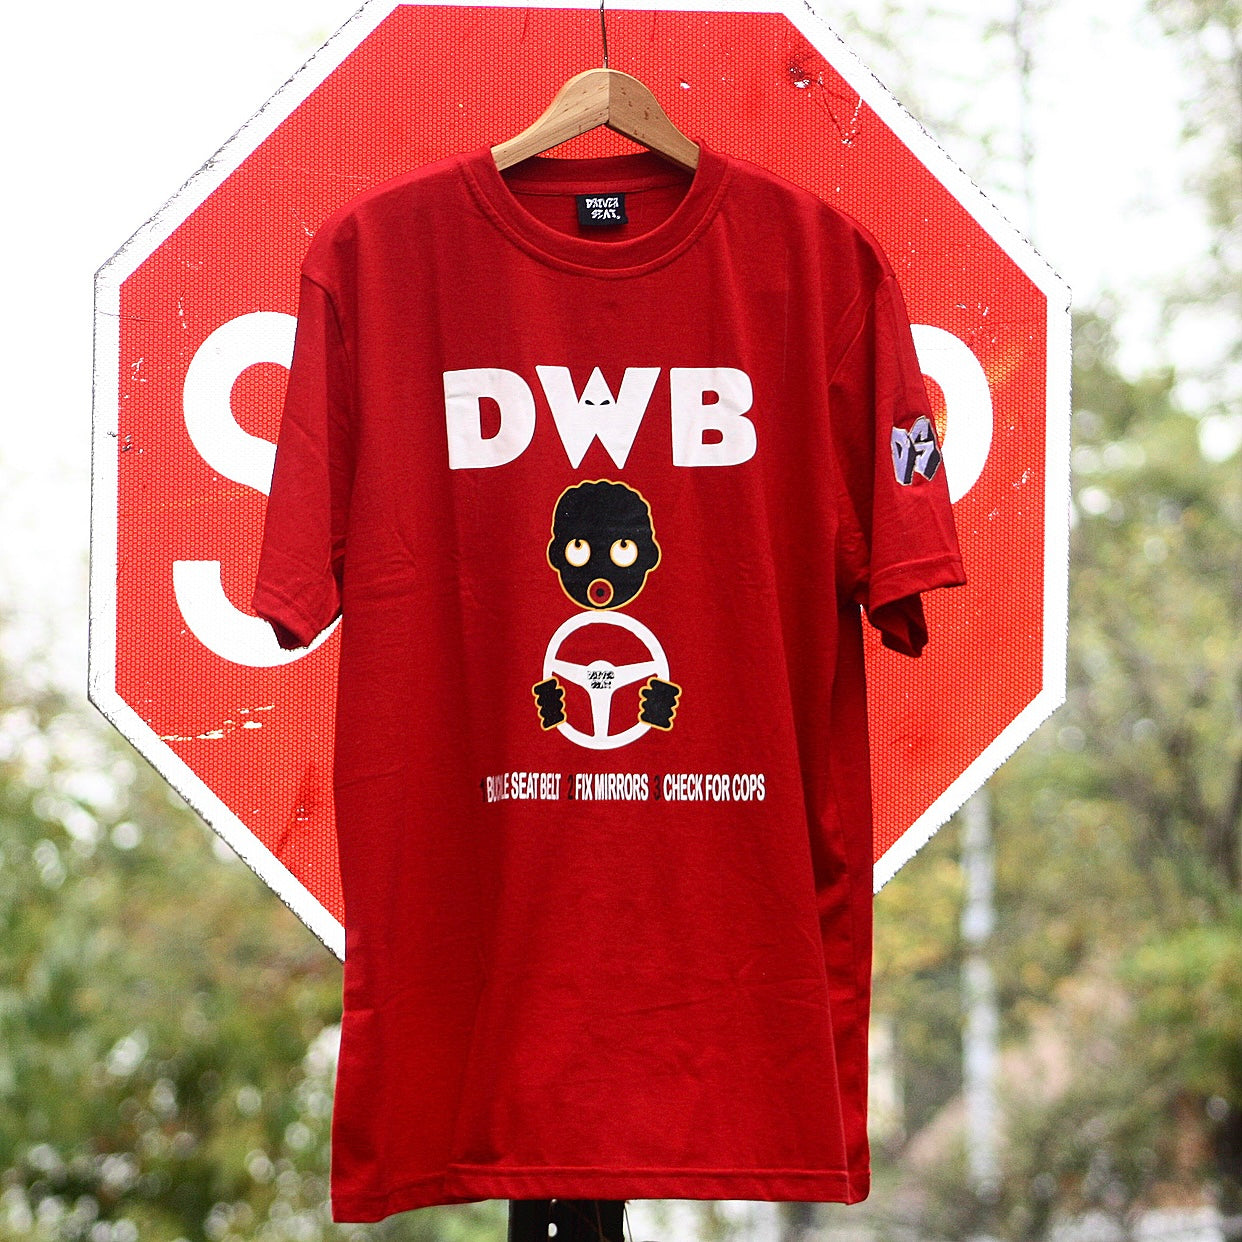 DWB Tee - Red